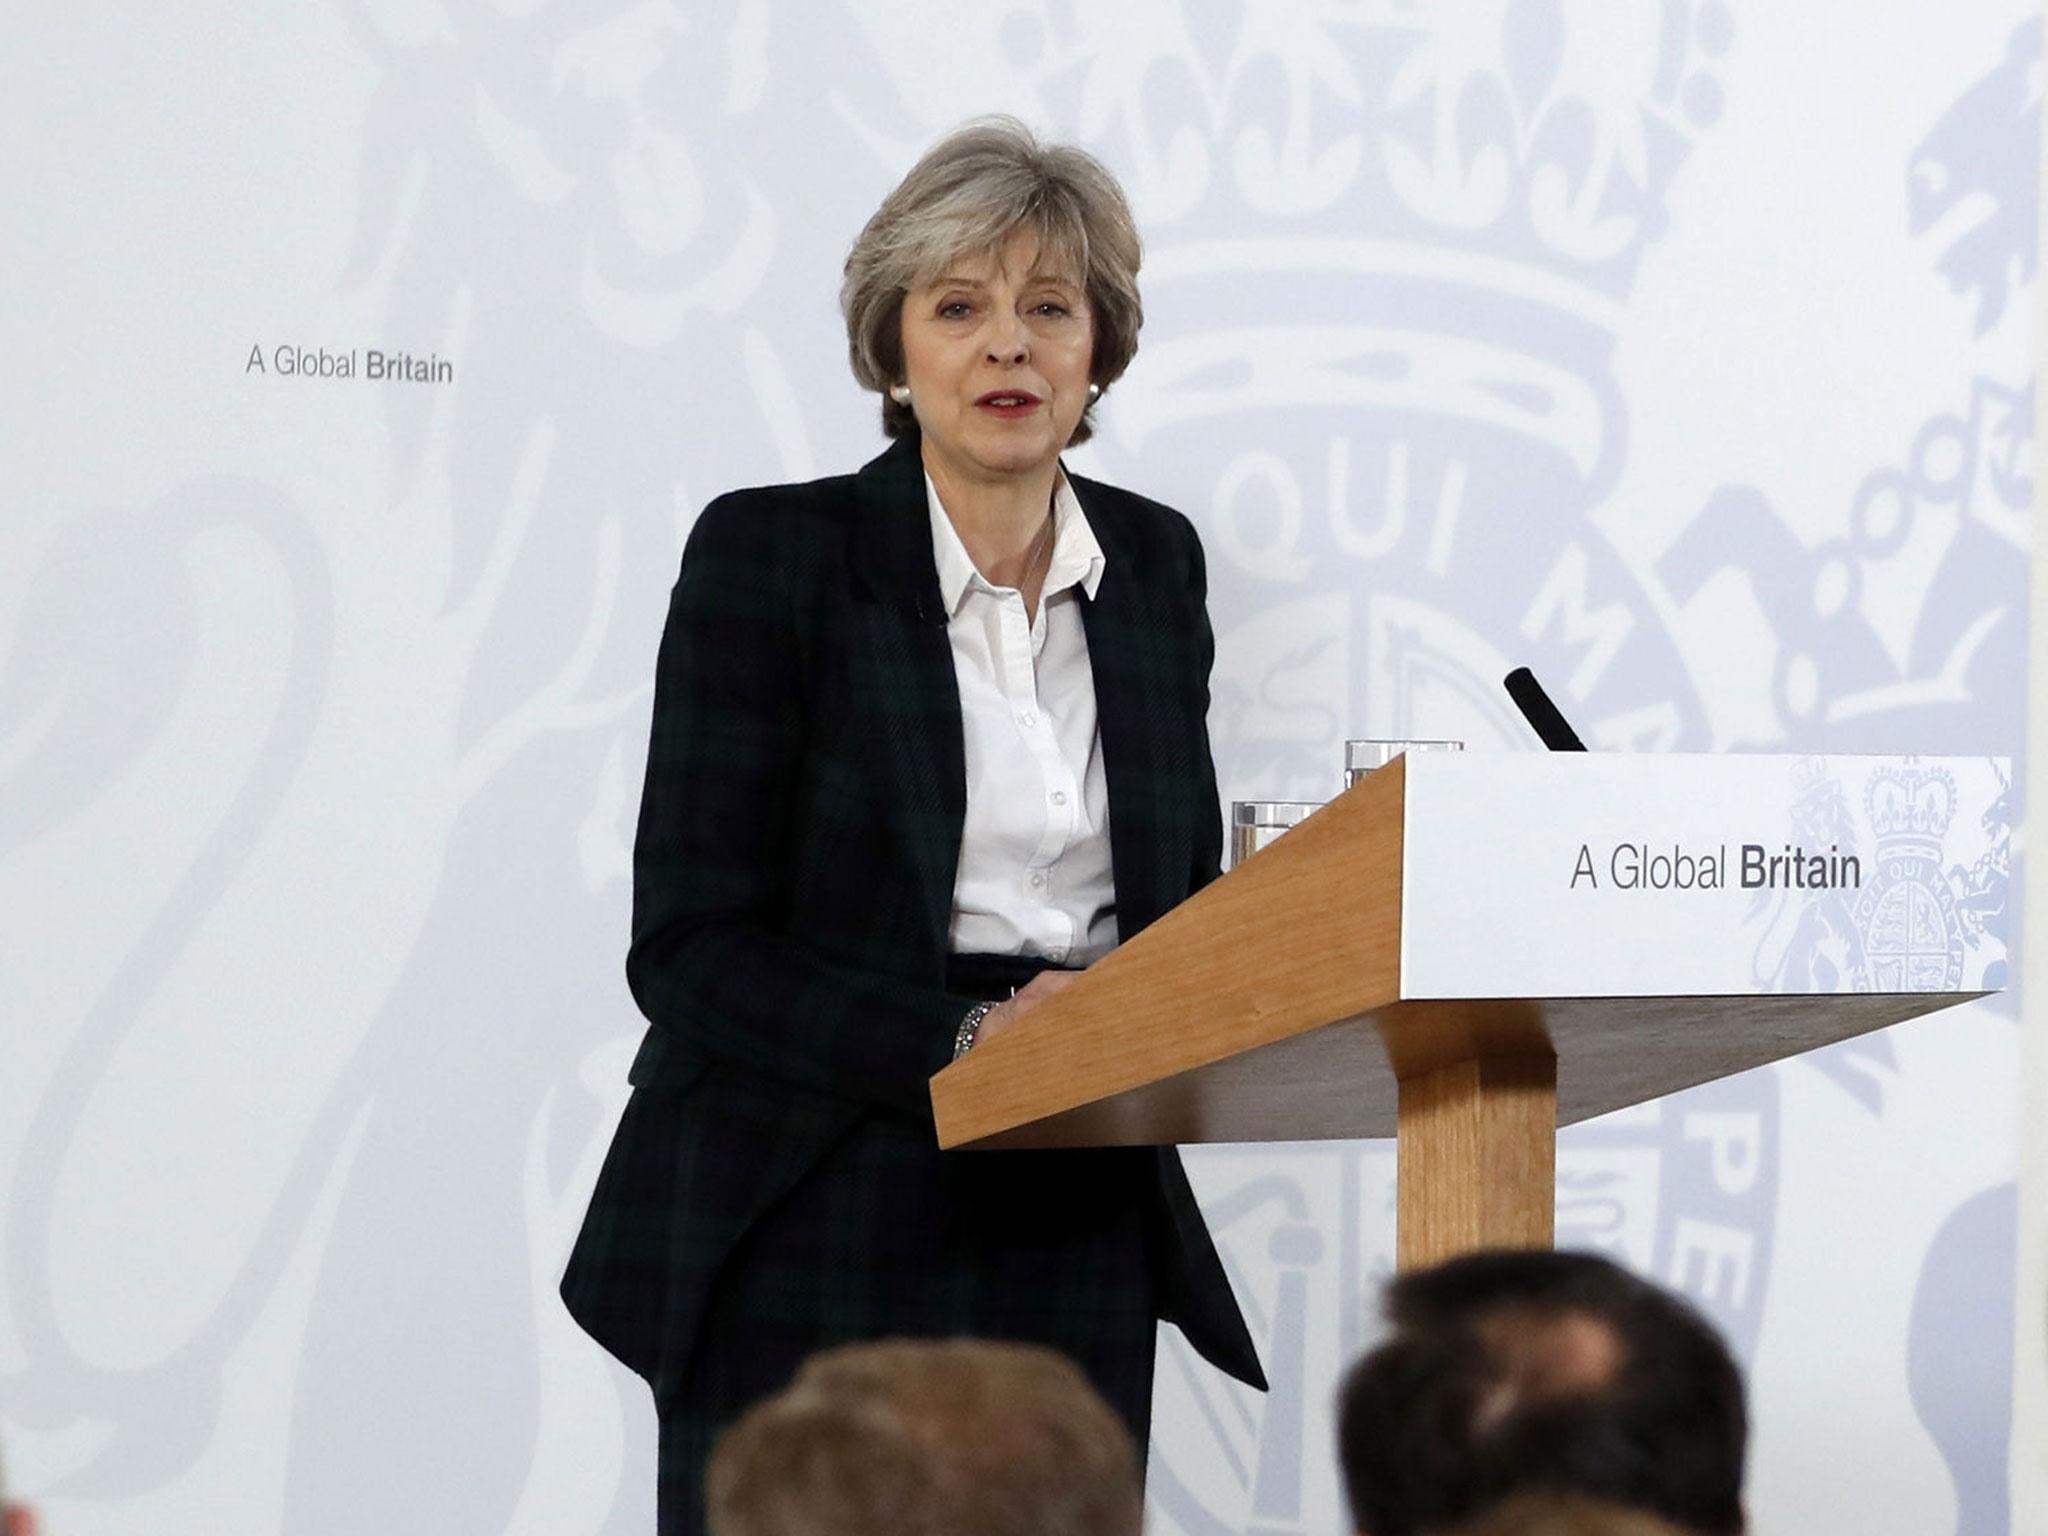 Theresa May issued her 'no deal is better than a bad deal' threat in her major Brexit speech in January